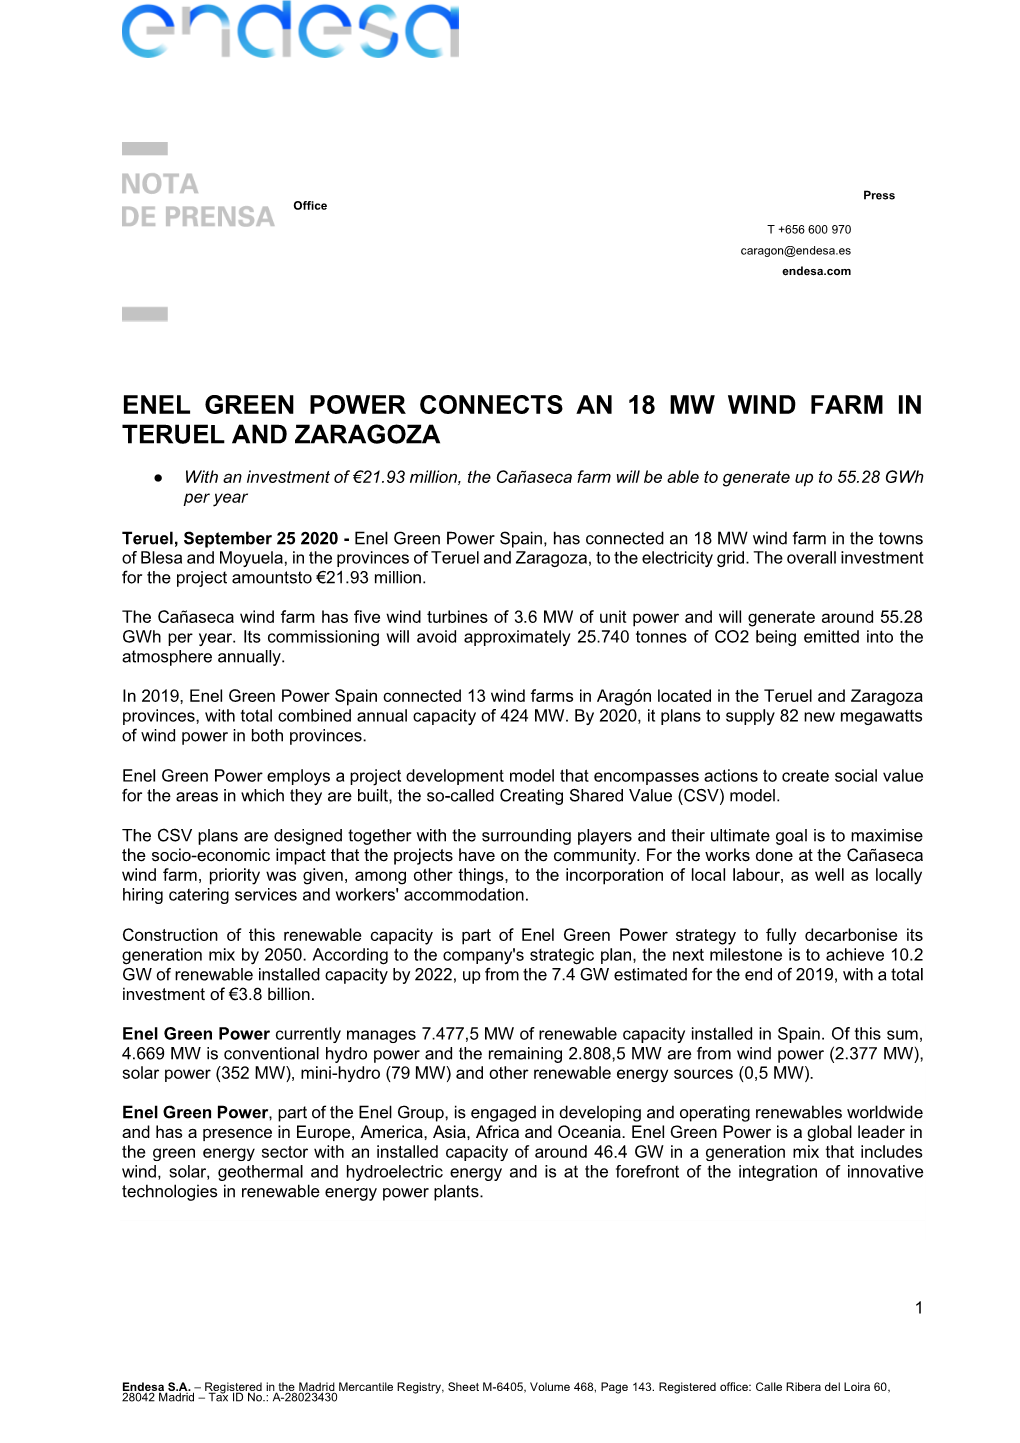 Enel Green Power Connects an 18 Mw Wind Farm in Teruel and Zaragoza